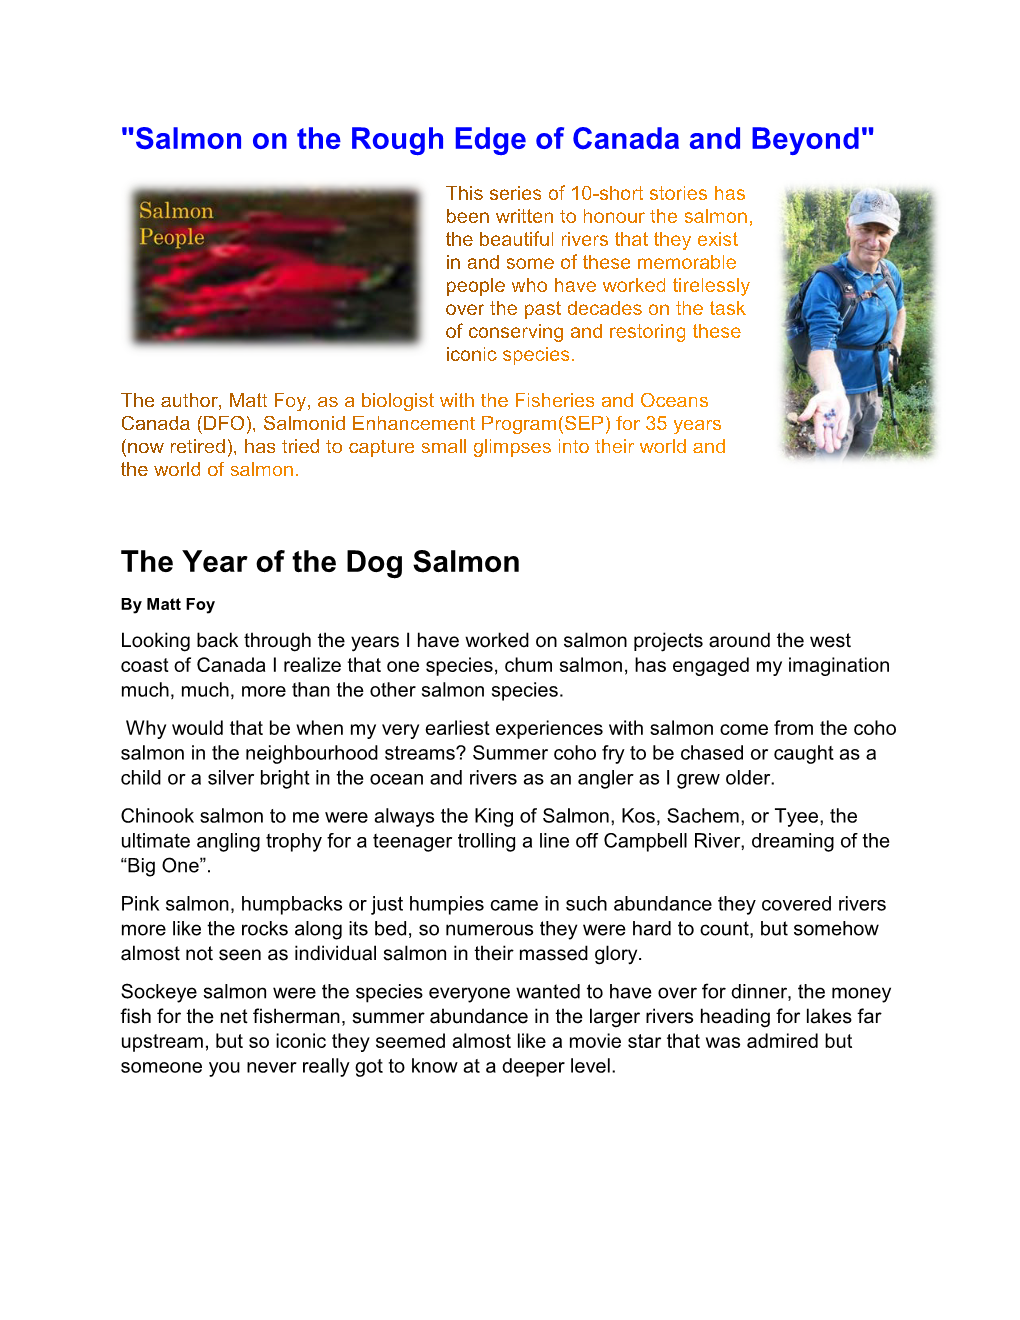 The Year of the Dog Salmon